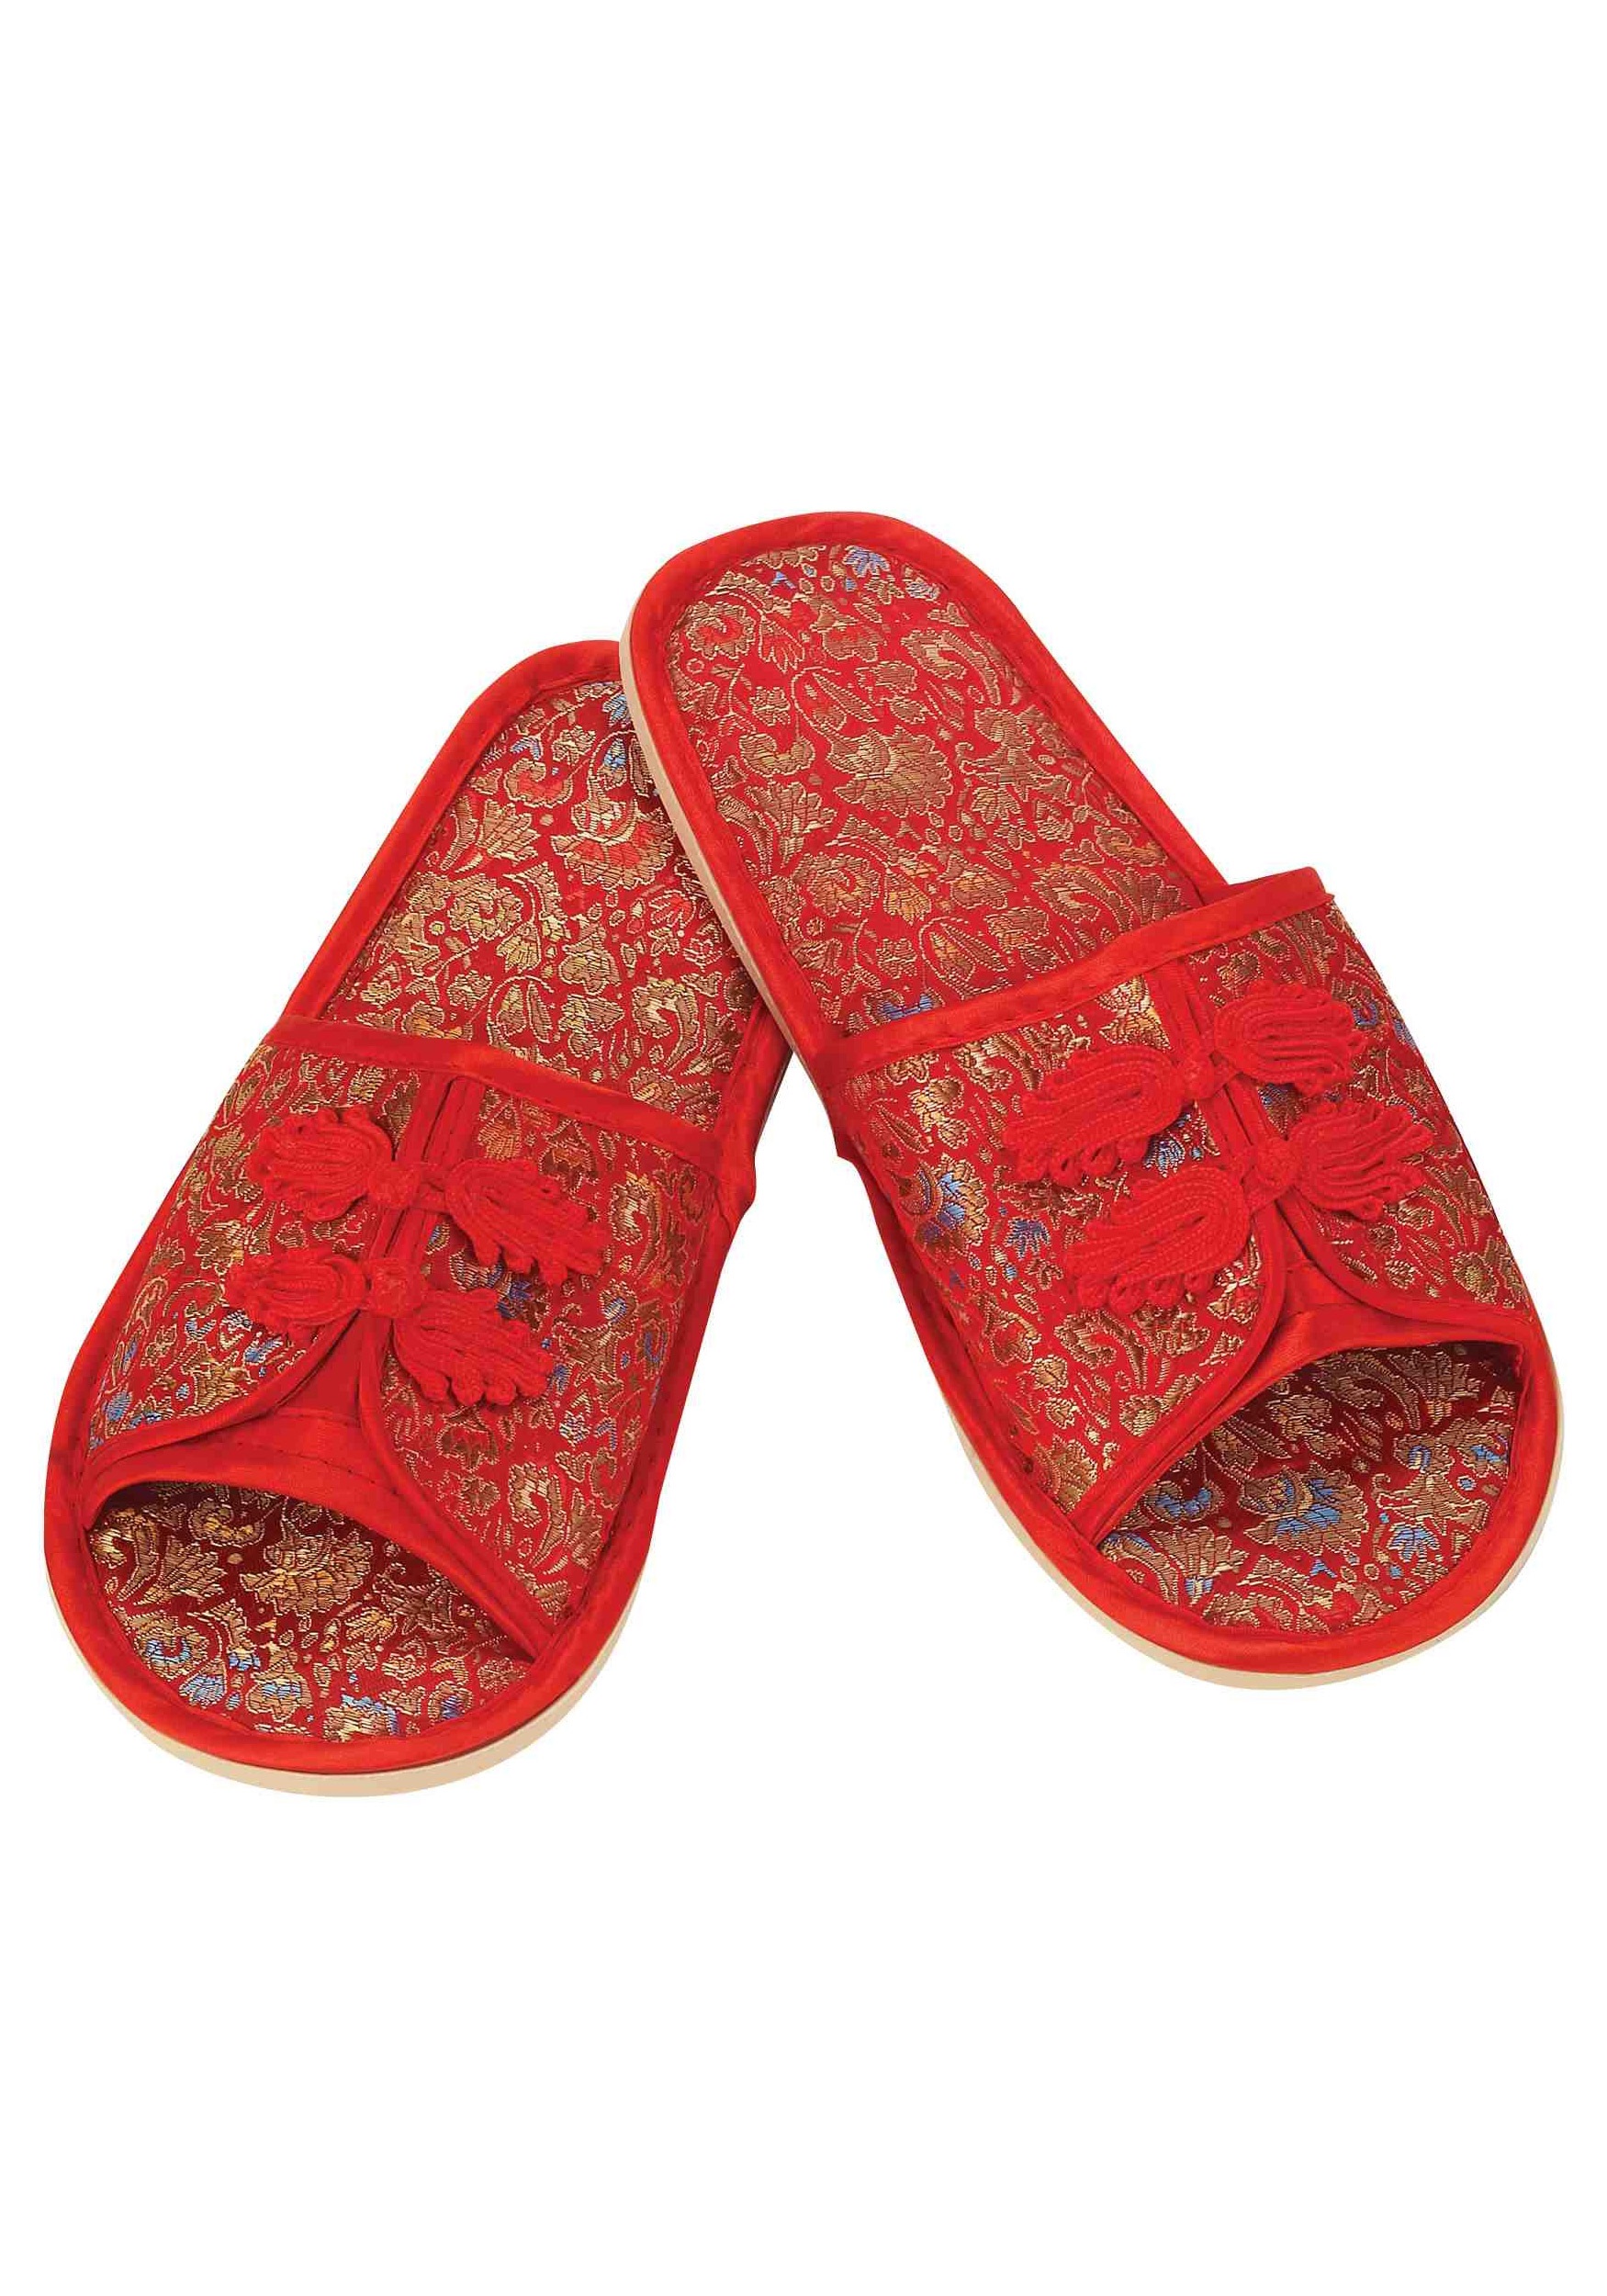 Red and Gold Geisha Sandals